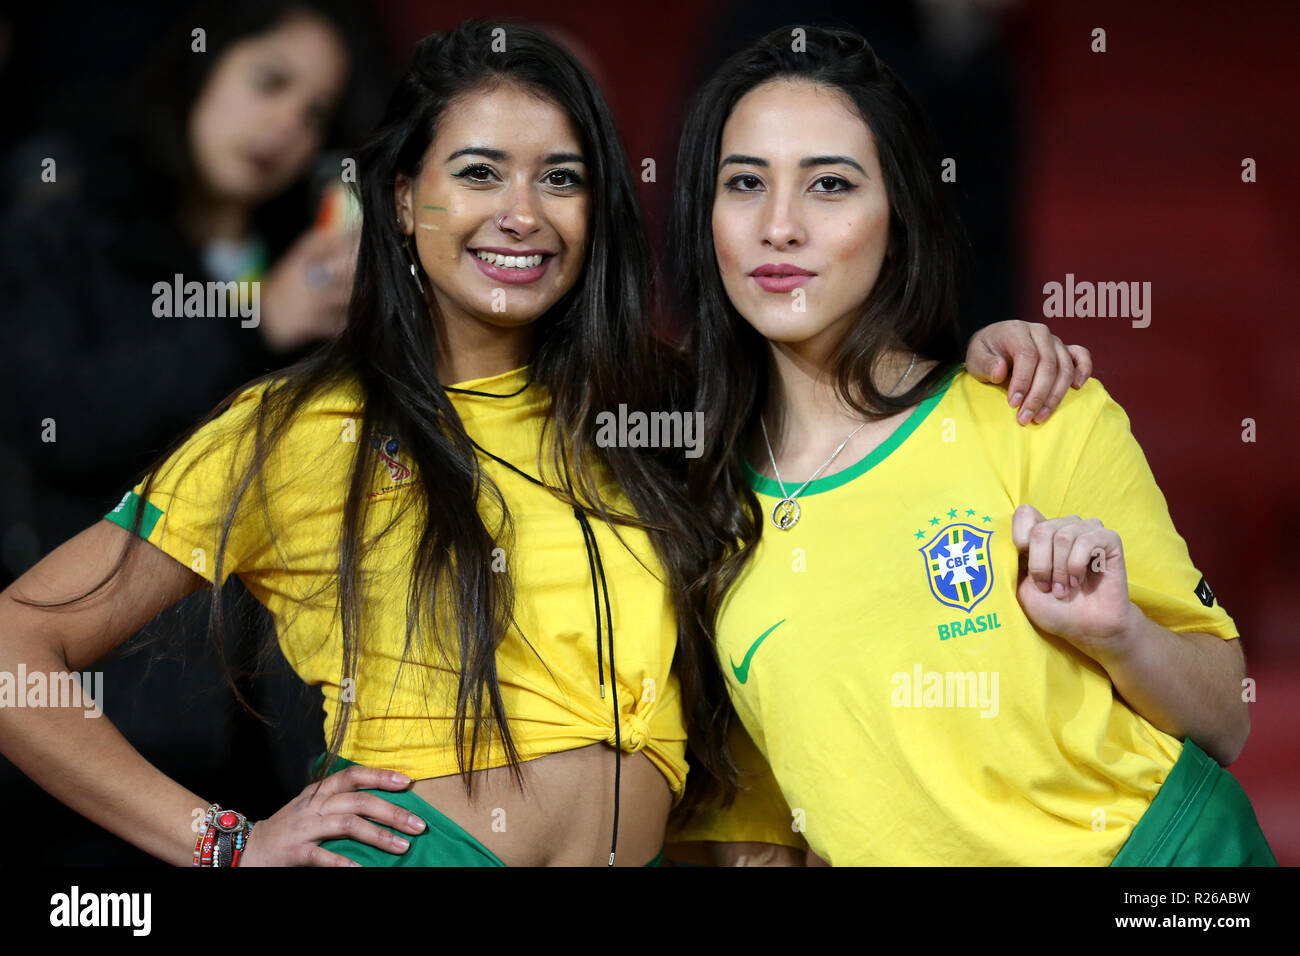 Brazil fans in the stands during the International Friendly match at the Emirates Stadium, London. PRESS ASSOCIATION Photo. Picture date: Friday November 16, 2018. See PA story SOCCER Brazil. Photo credit should read: Steven Paston/PA Wire Stock Photo